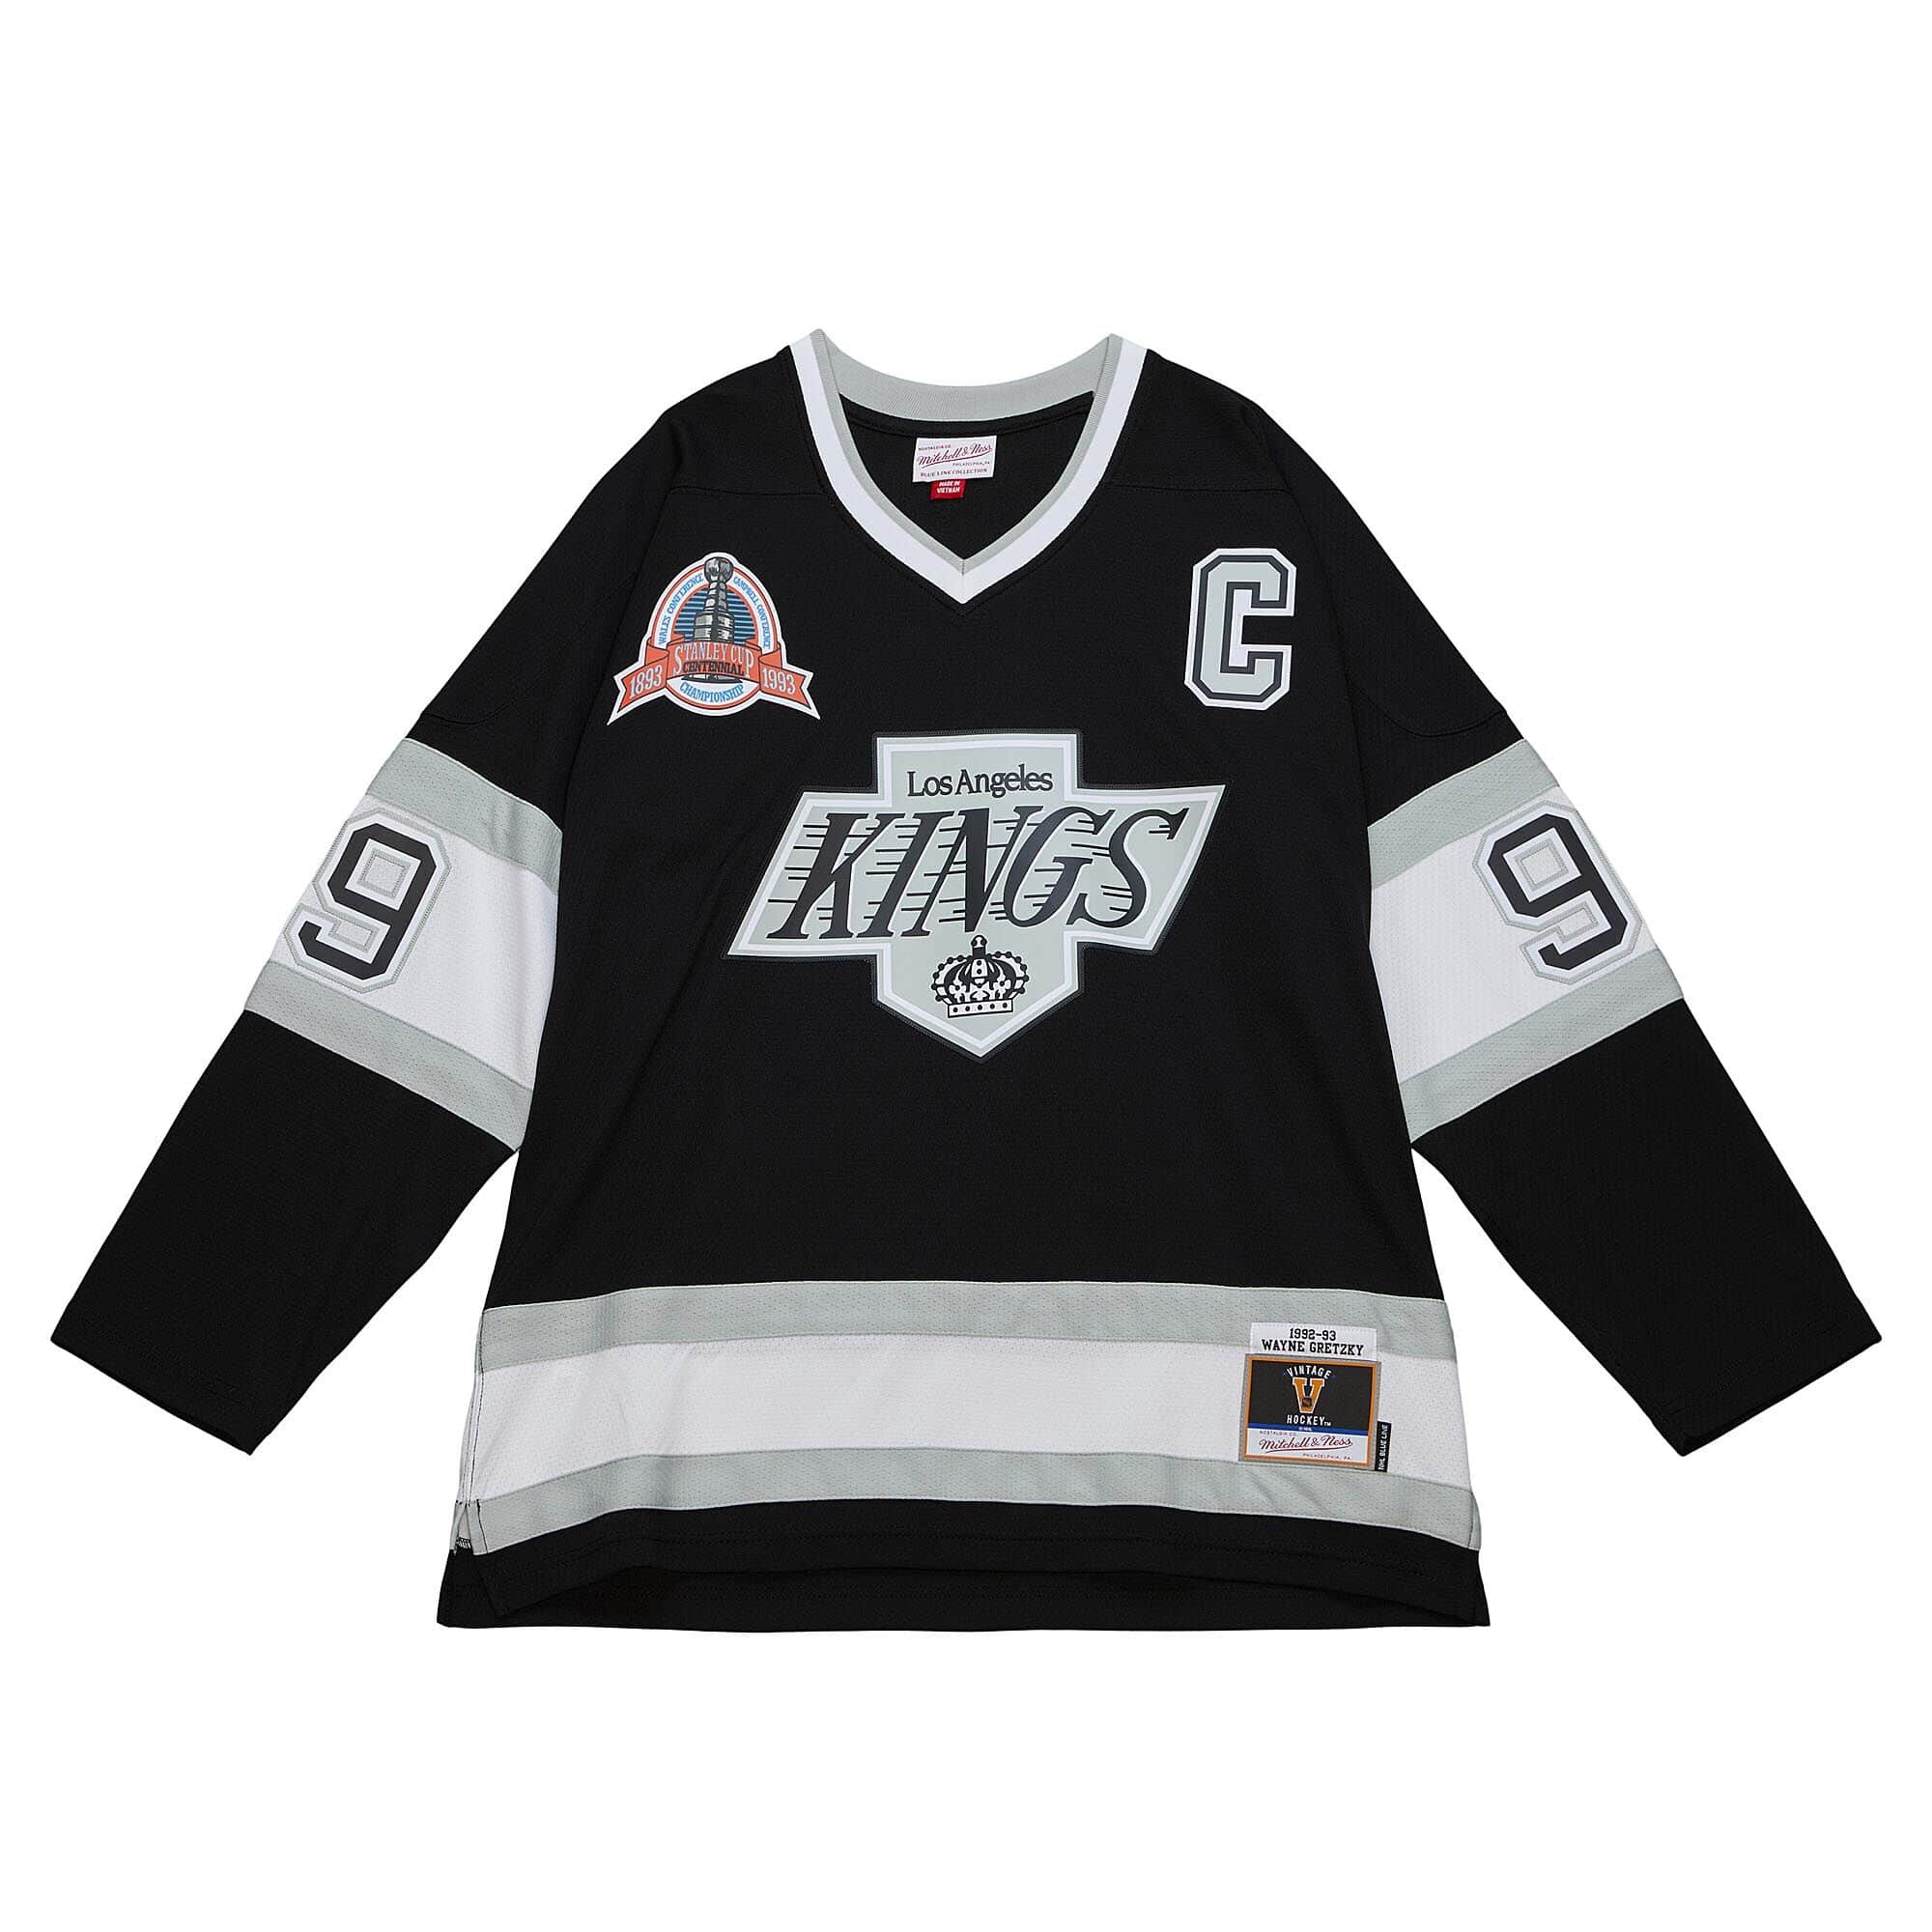 The Jersey History of the Los Angeles Kings 